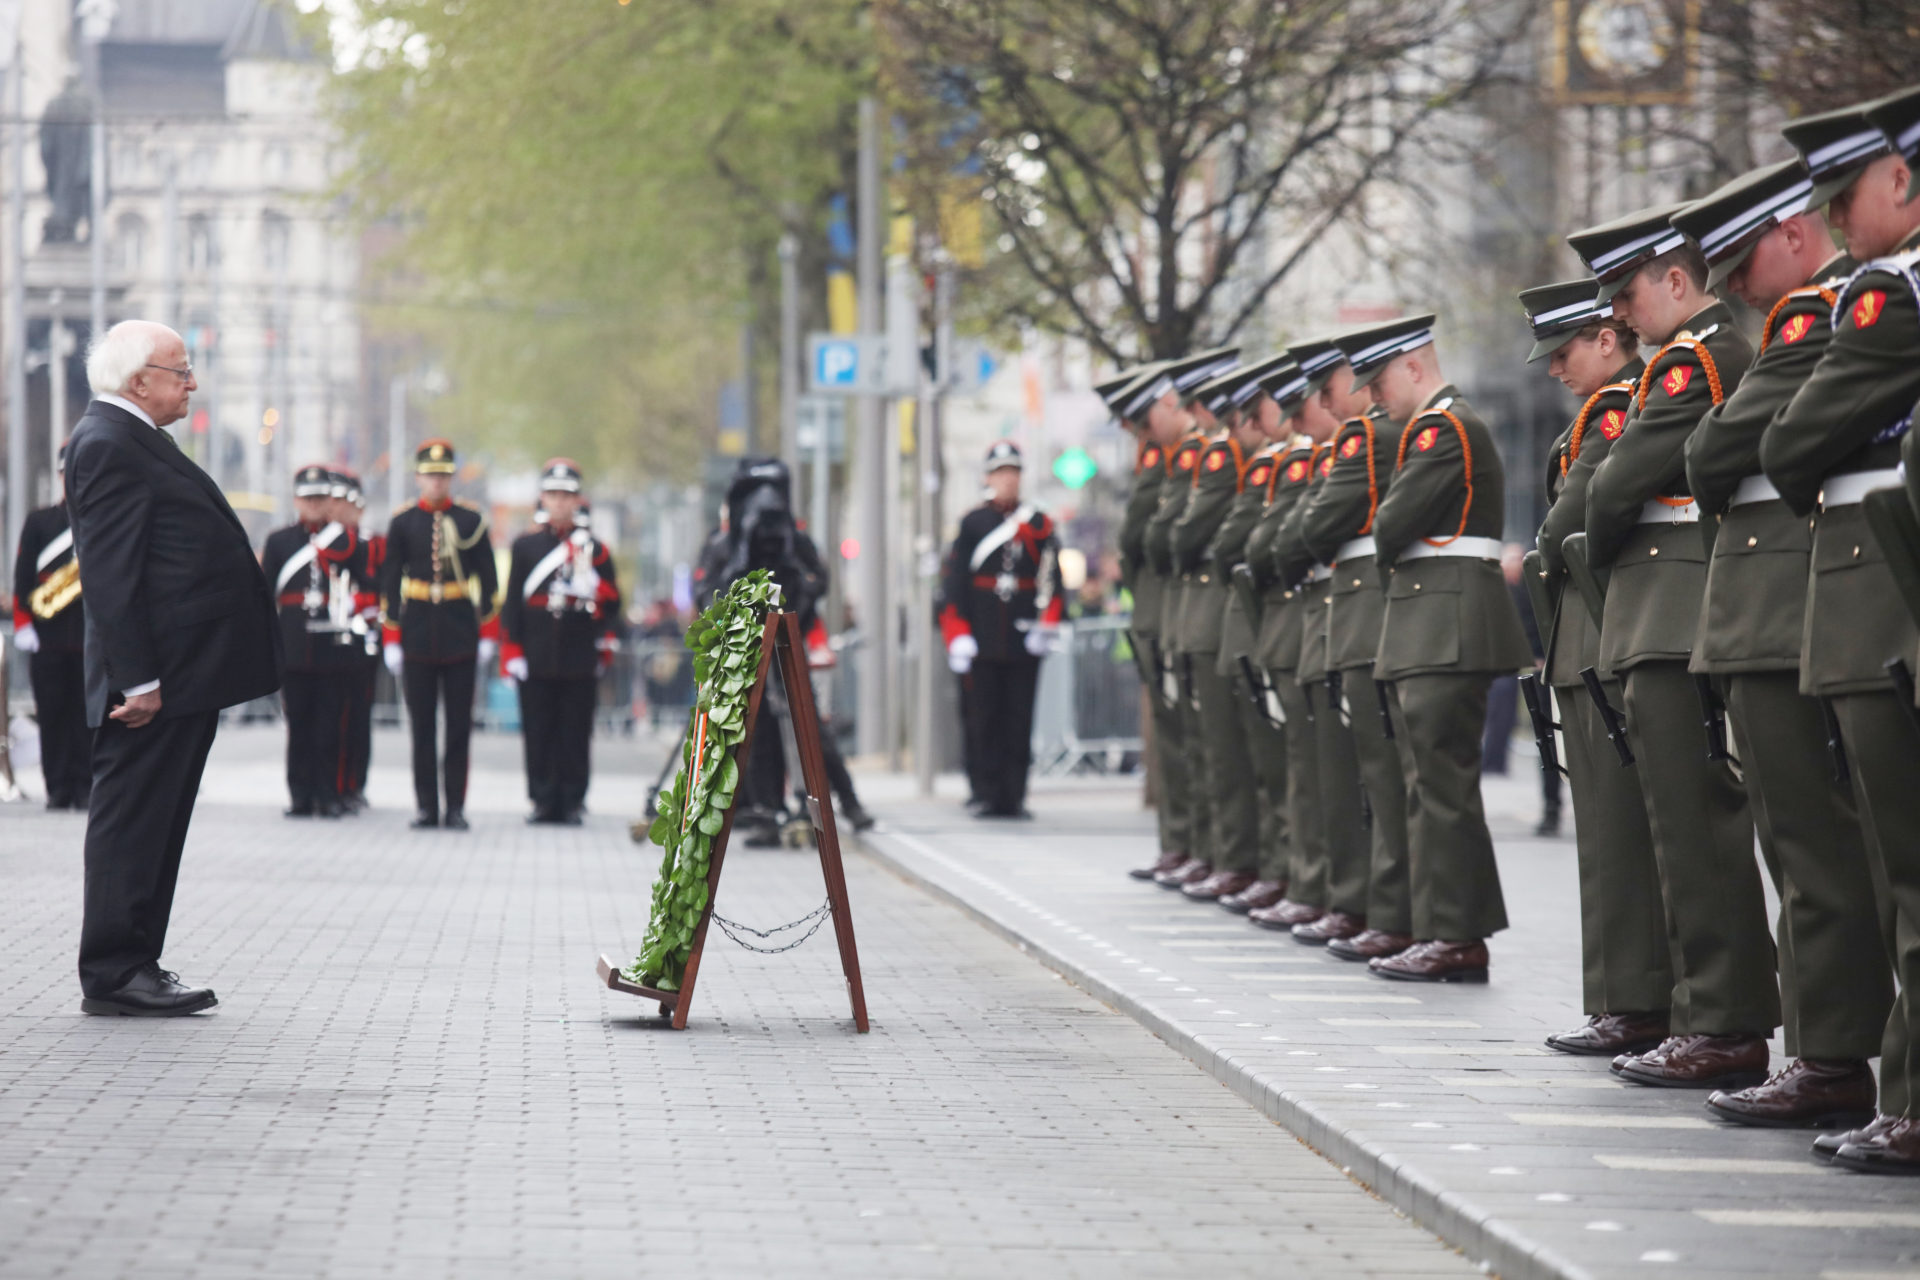 President Michael D Higgins lays a wreath during a ceremony to mark the anniversary of the 1916 Easter Rising at the GPO on O'Connell Street, Dublin in 2022. 